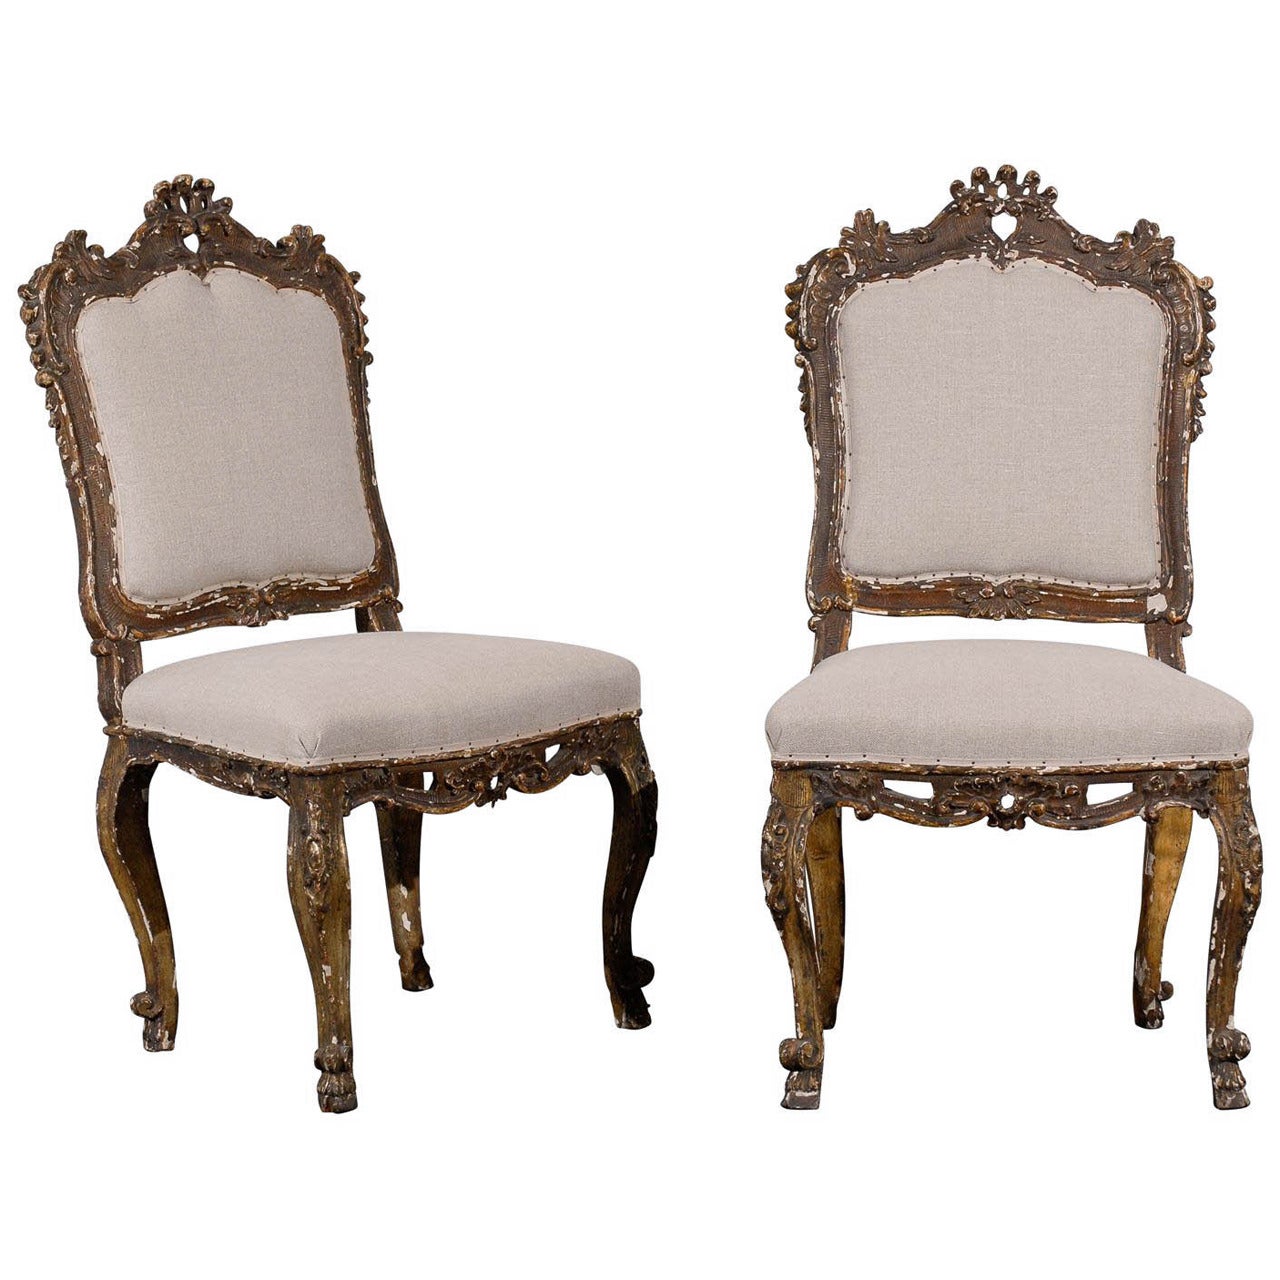 Pair of Italian Ornate, 18th Century Venetian Style Side Chairs For Sale